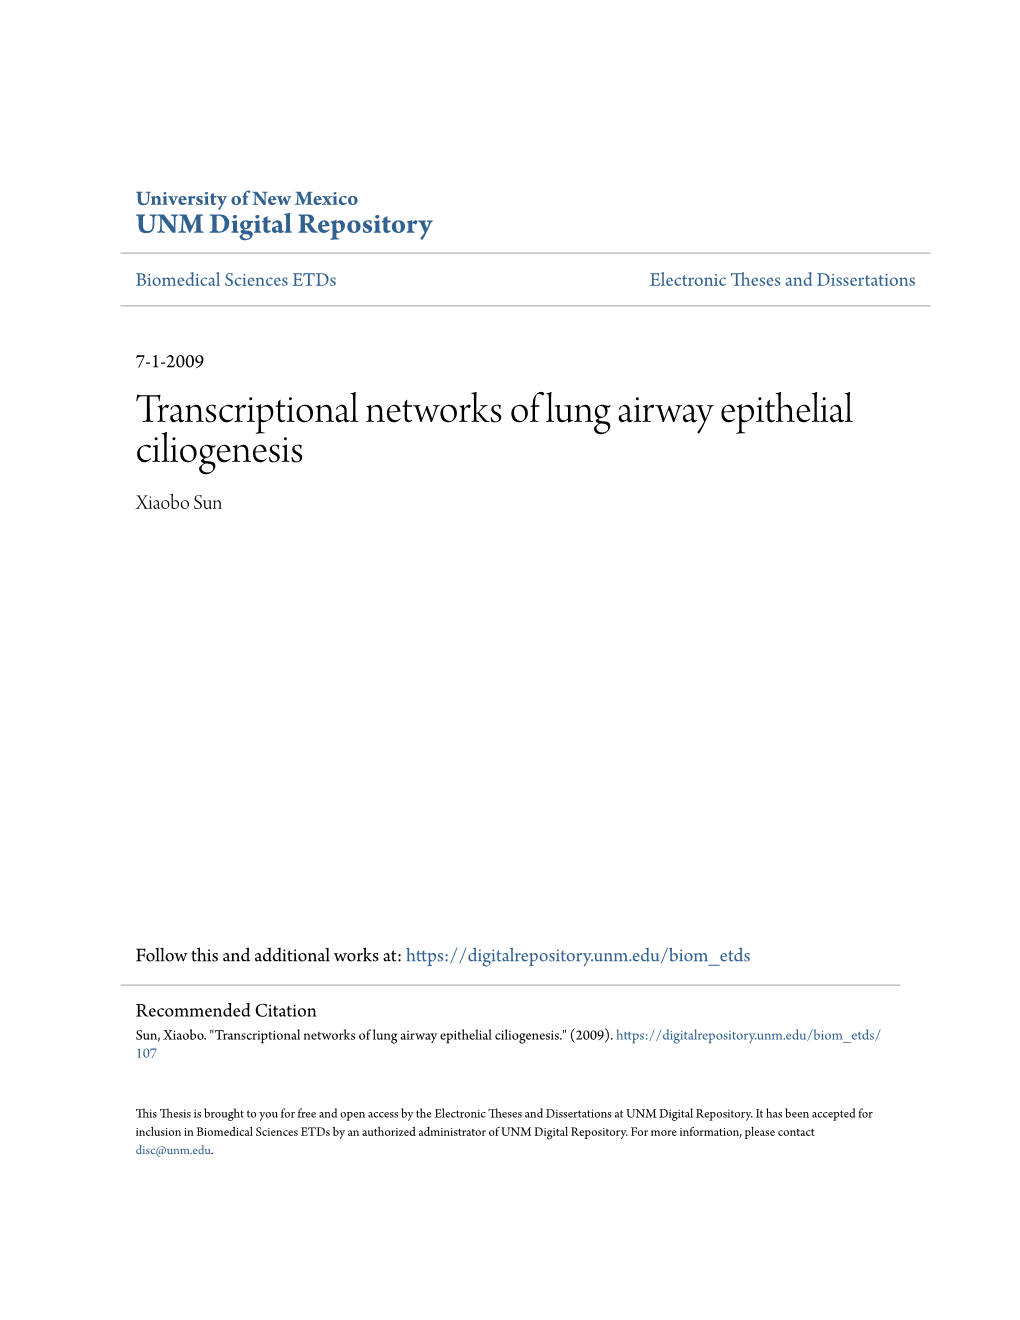 Transcriptional Networks of Lung Airway Epithelial Ciliogenesis Xiaobo Sun